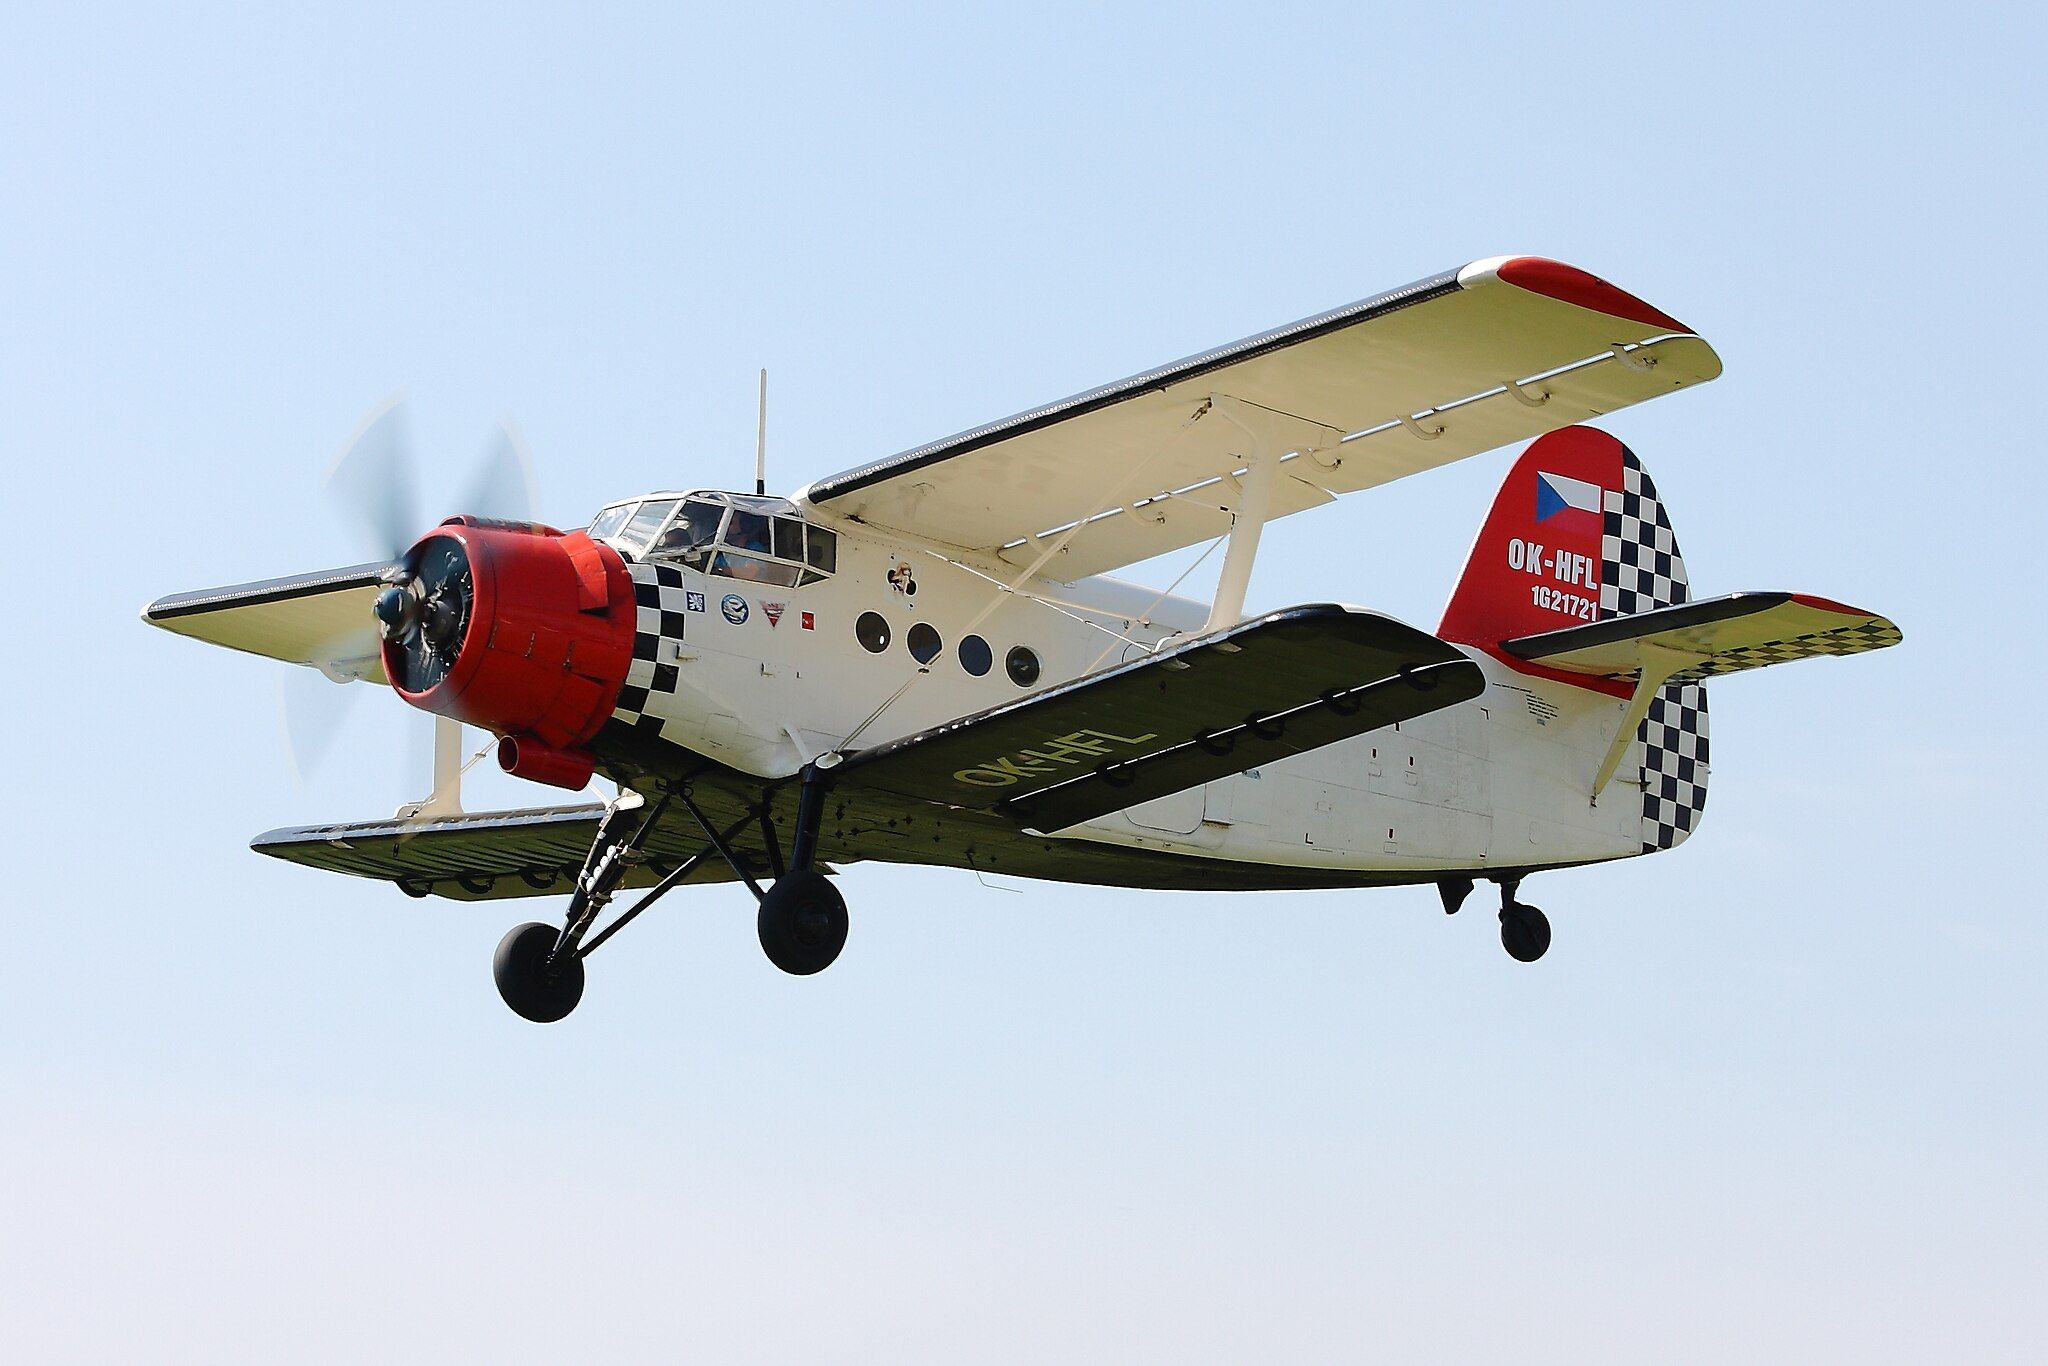 White biplane with red nose and tail flying in blue sky.